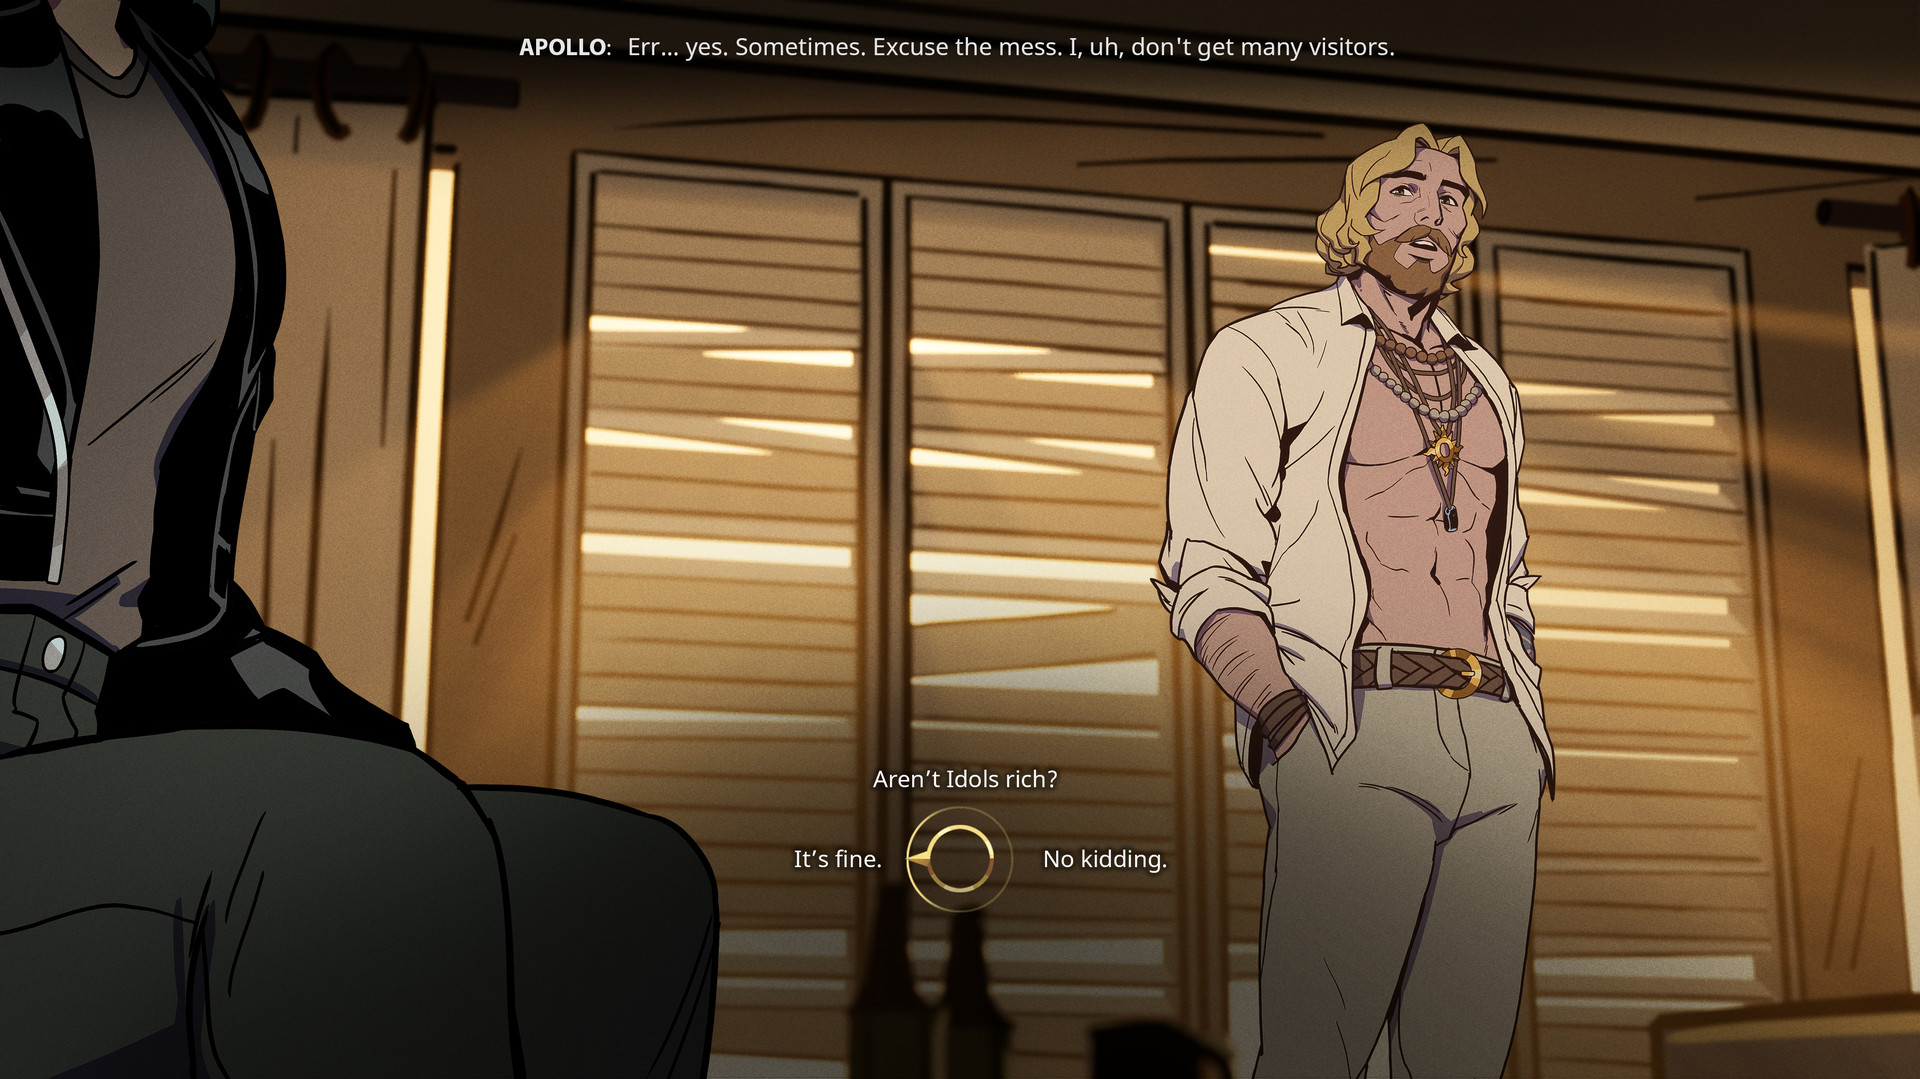 Stray Gods: The Roleplaying Musical instal the last version for ios